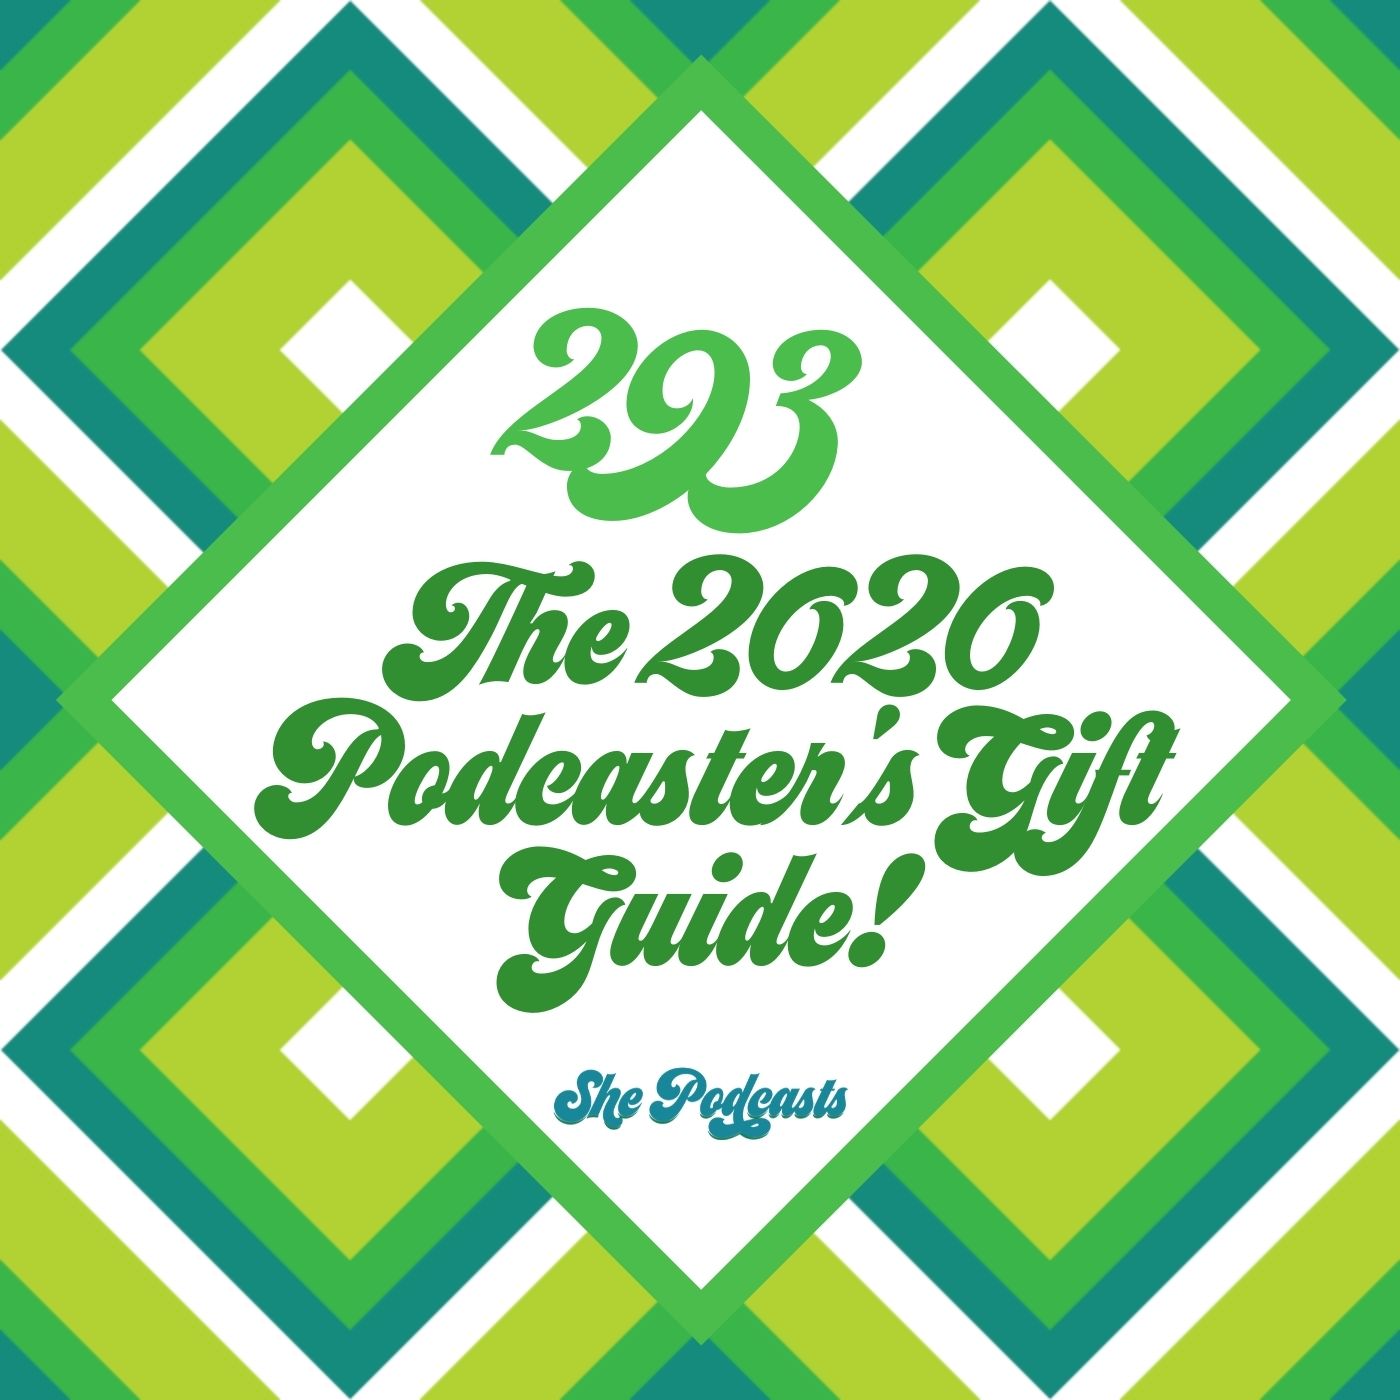 293 The 2020 Podcasters Gift Guide